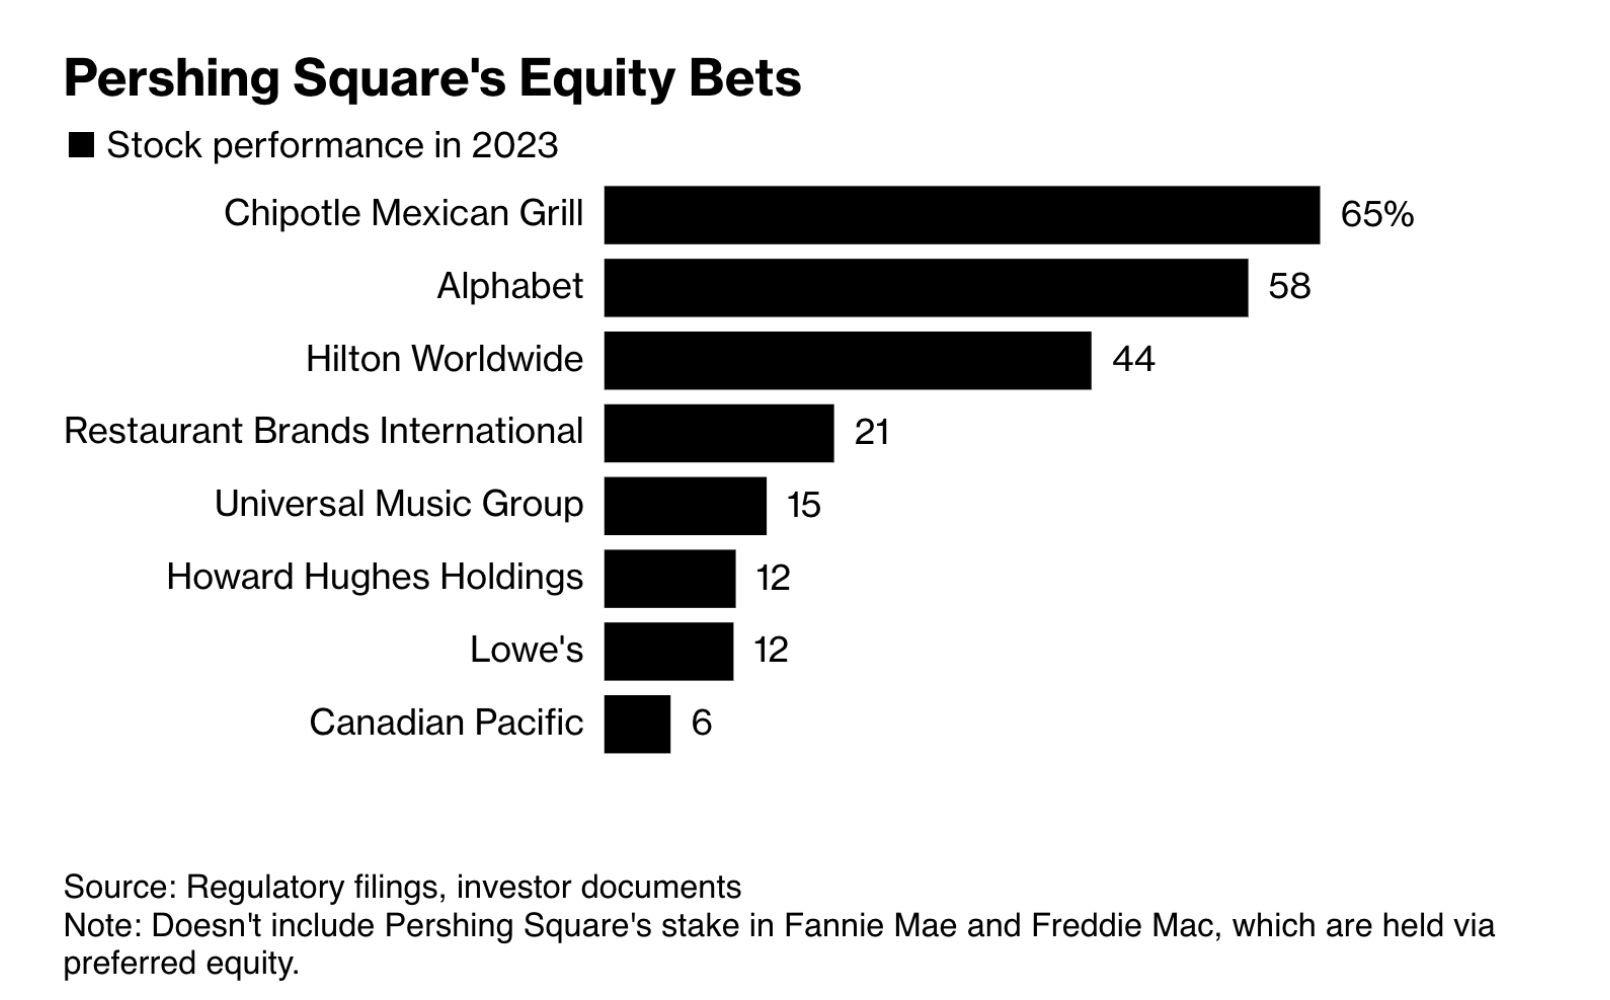 Pershing Square equity bets